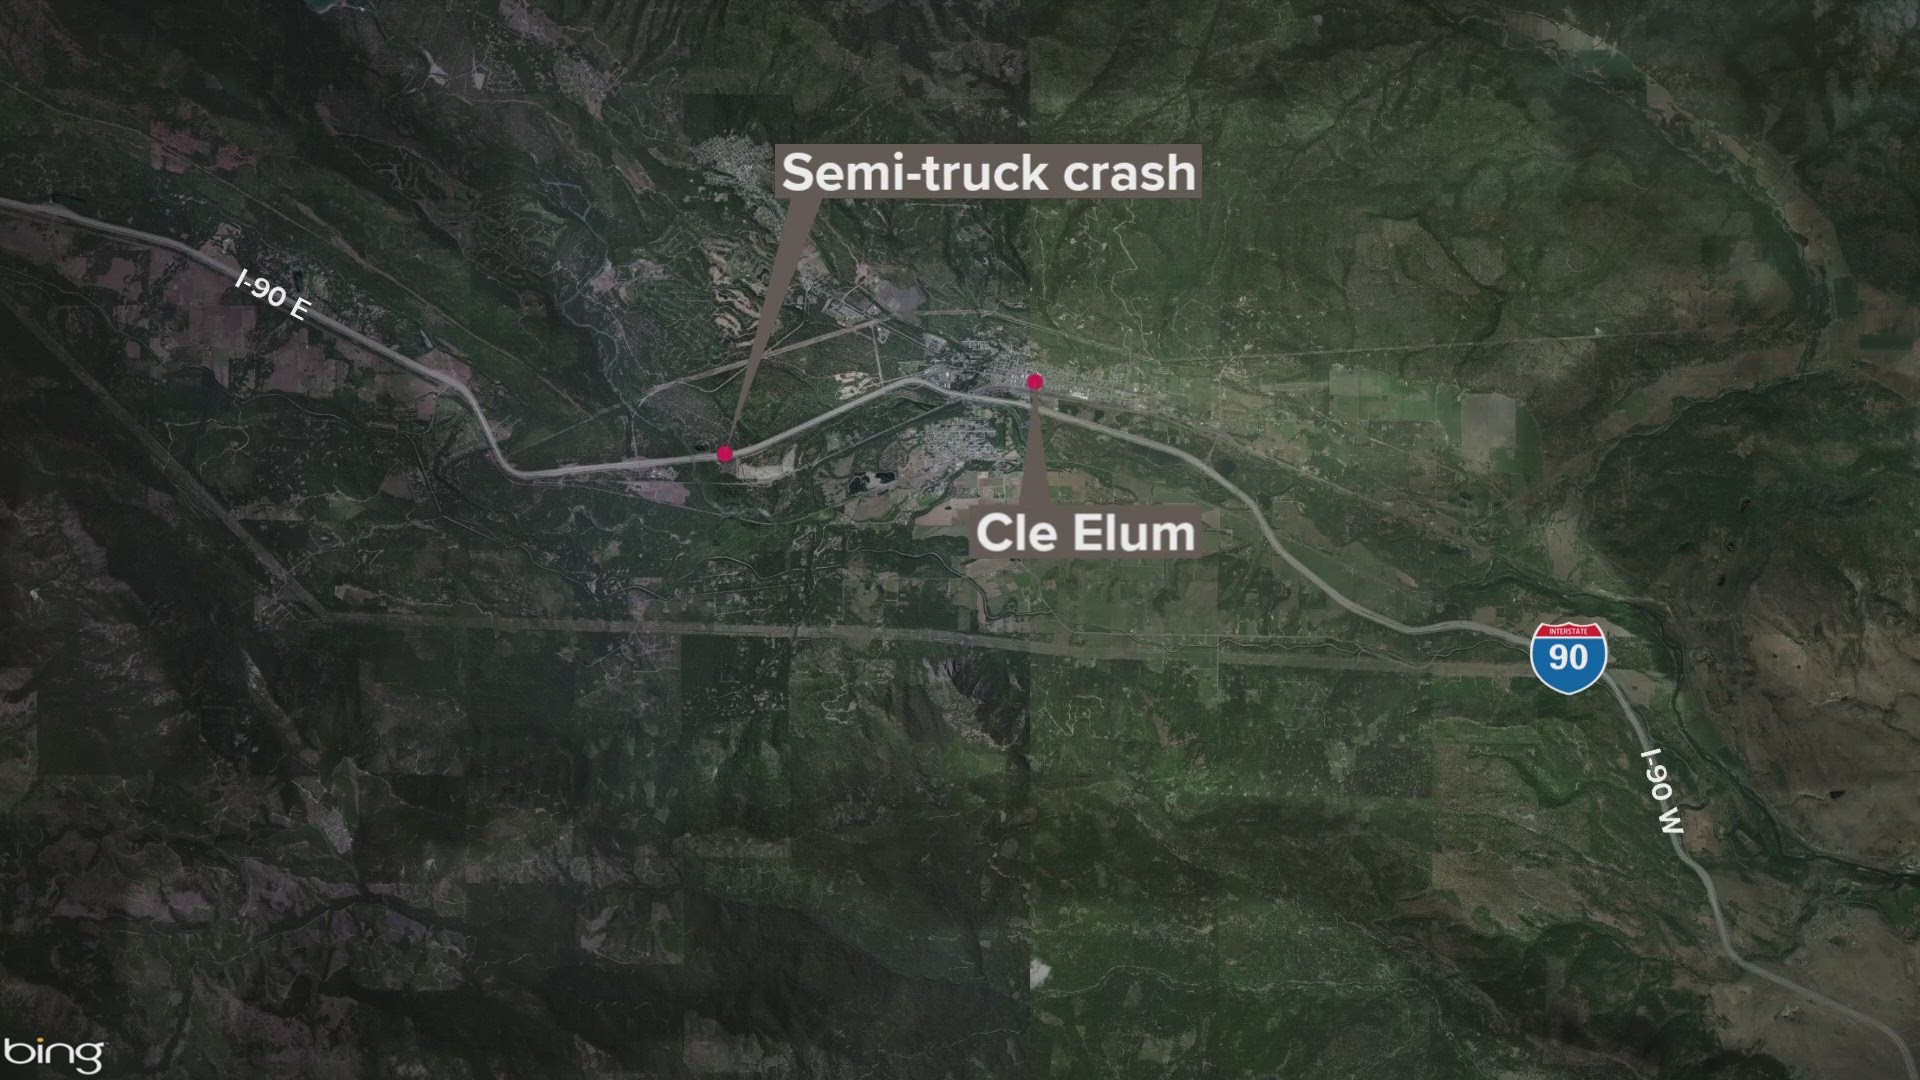 An accident involving a semi-truck, a WSP patrol vehicle and a DOT truck has all but one lane of I-90 W closed in Cle Elum